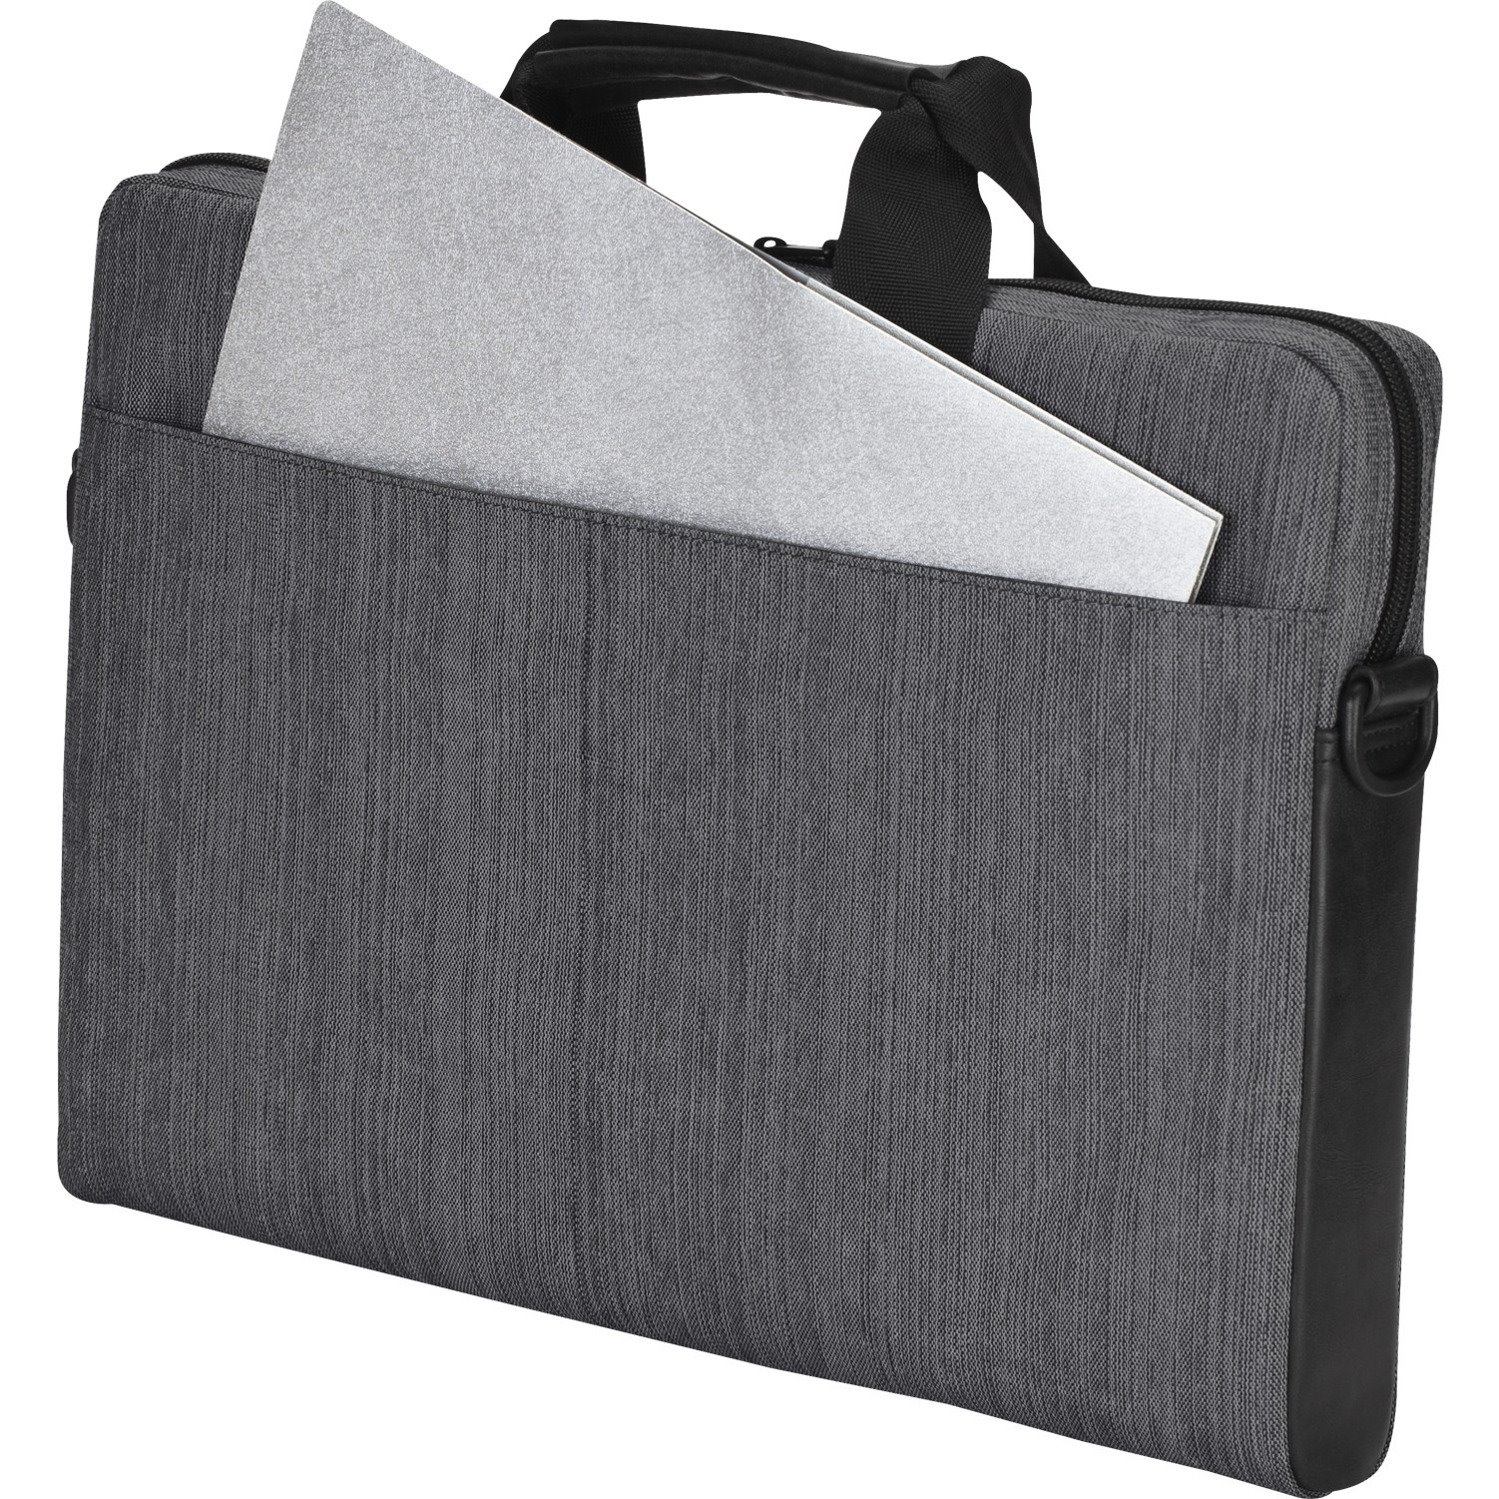 Targus City Smart TSS59404CA Carrying Case for 16" Notebook - Gray